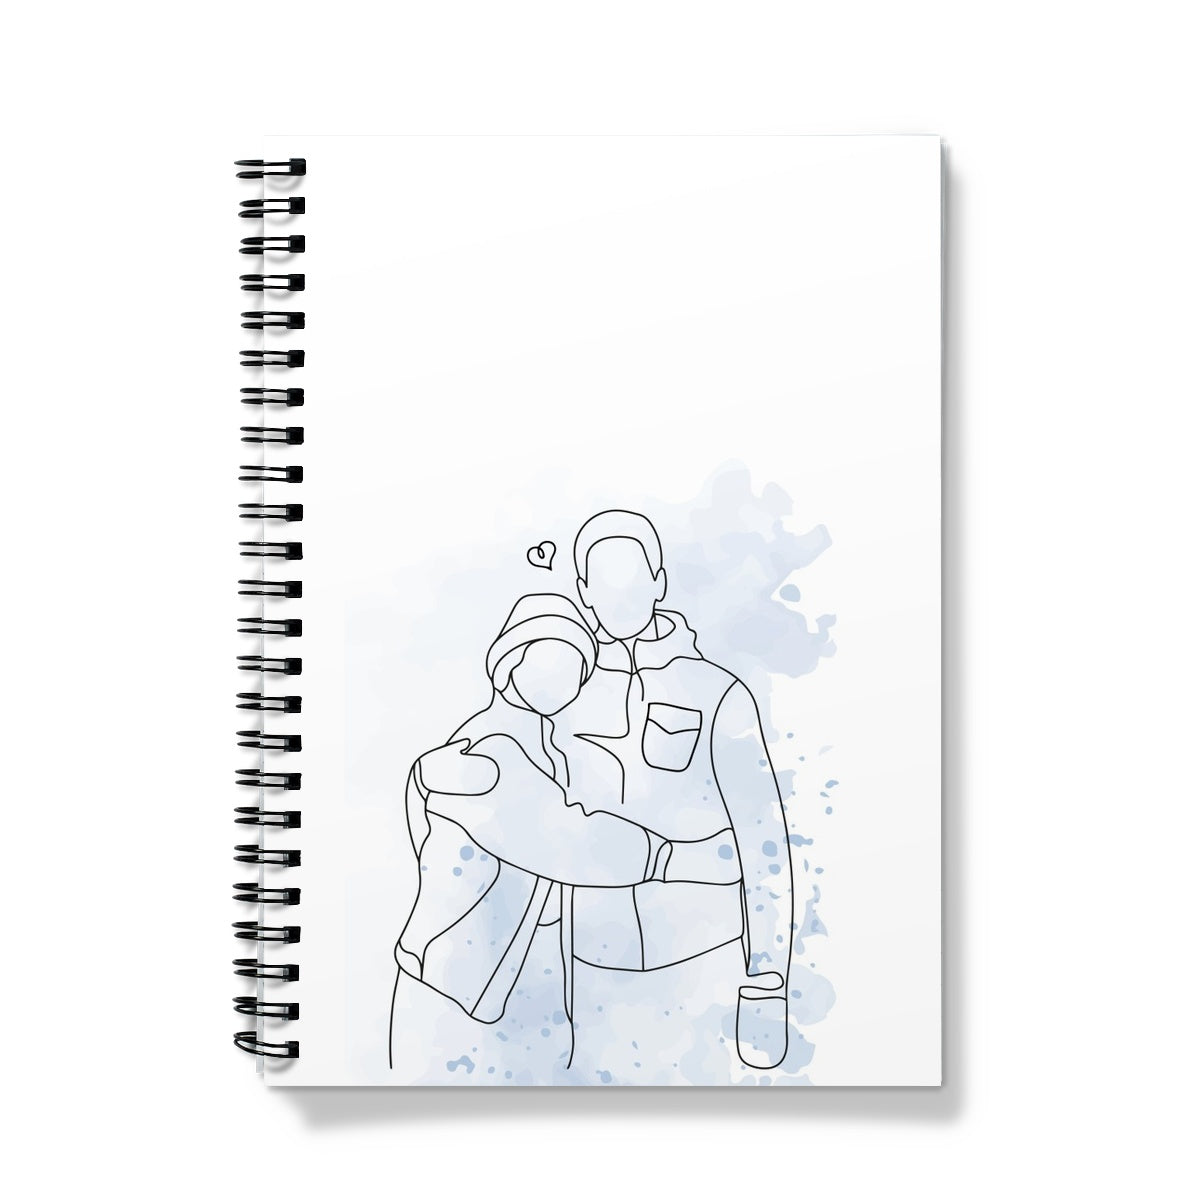 Lovers Line Drawing Notebook